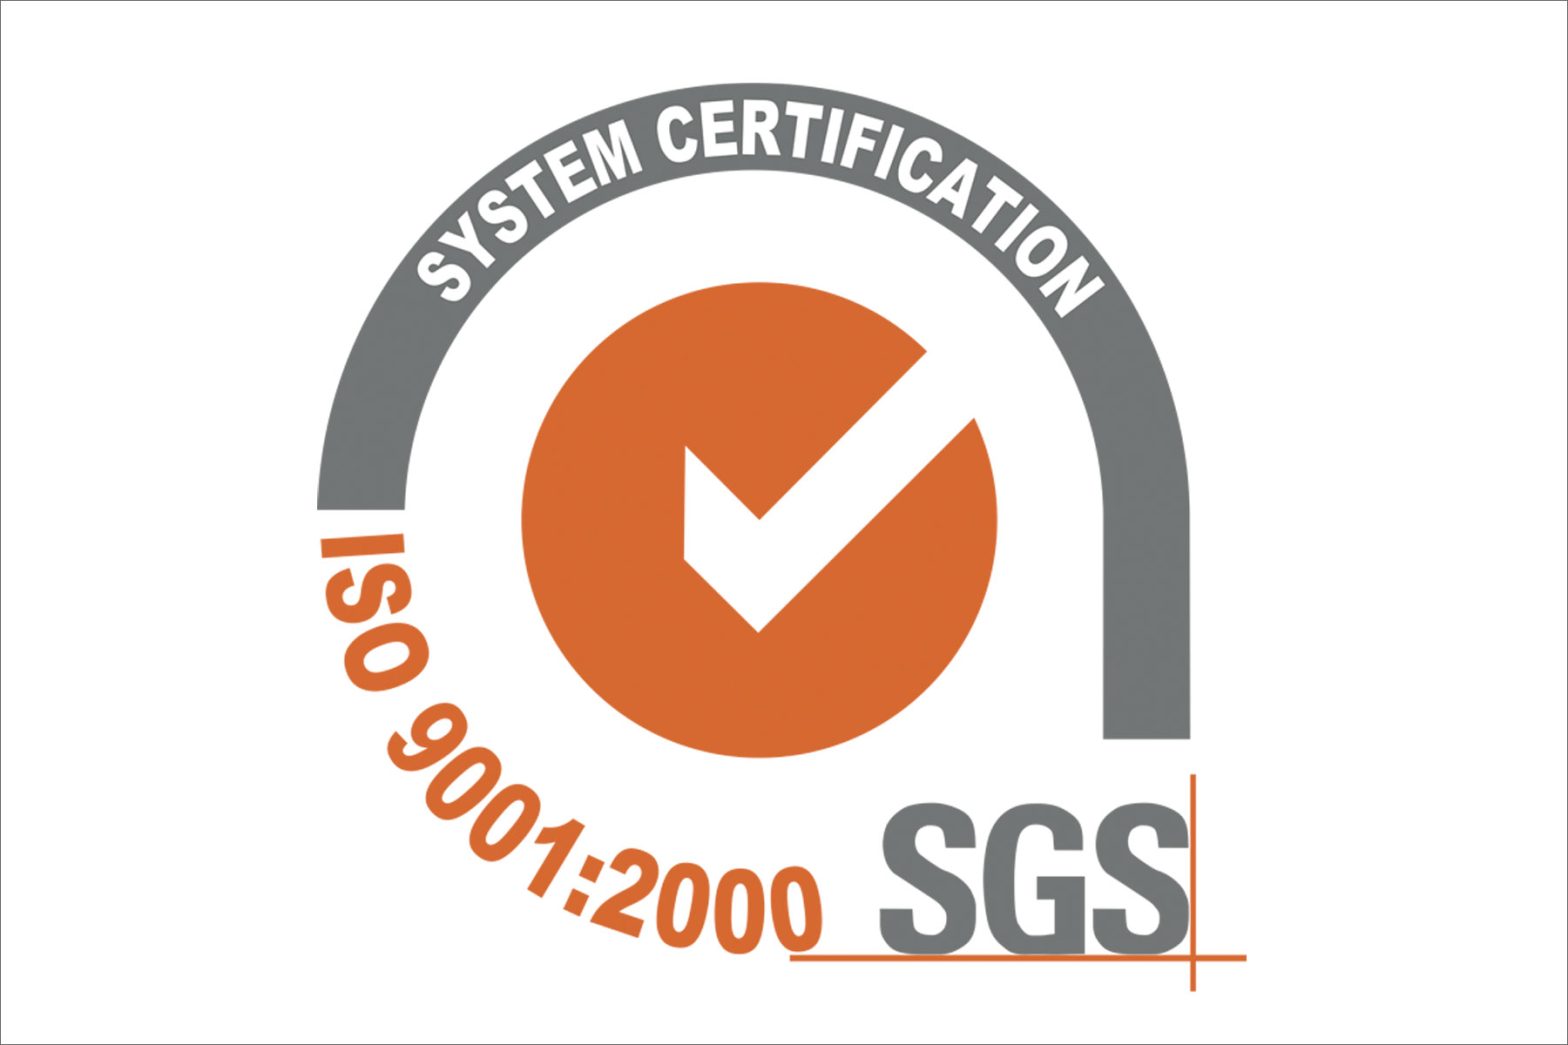 Certifications for injection quills to comply